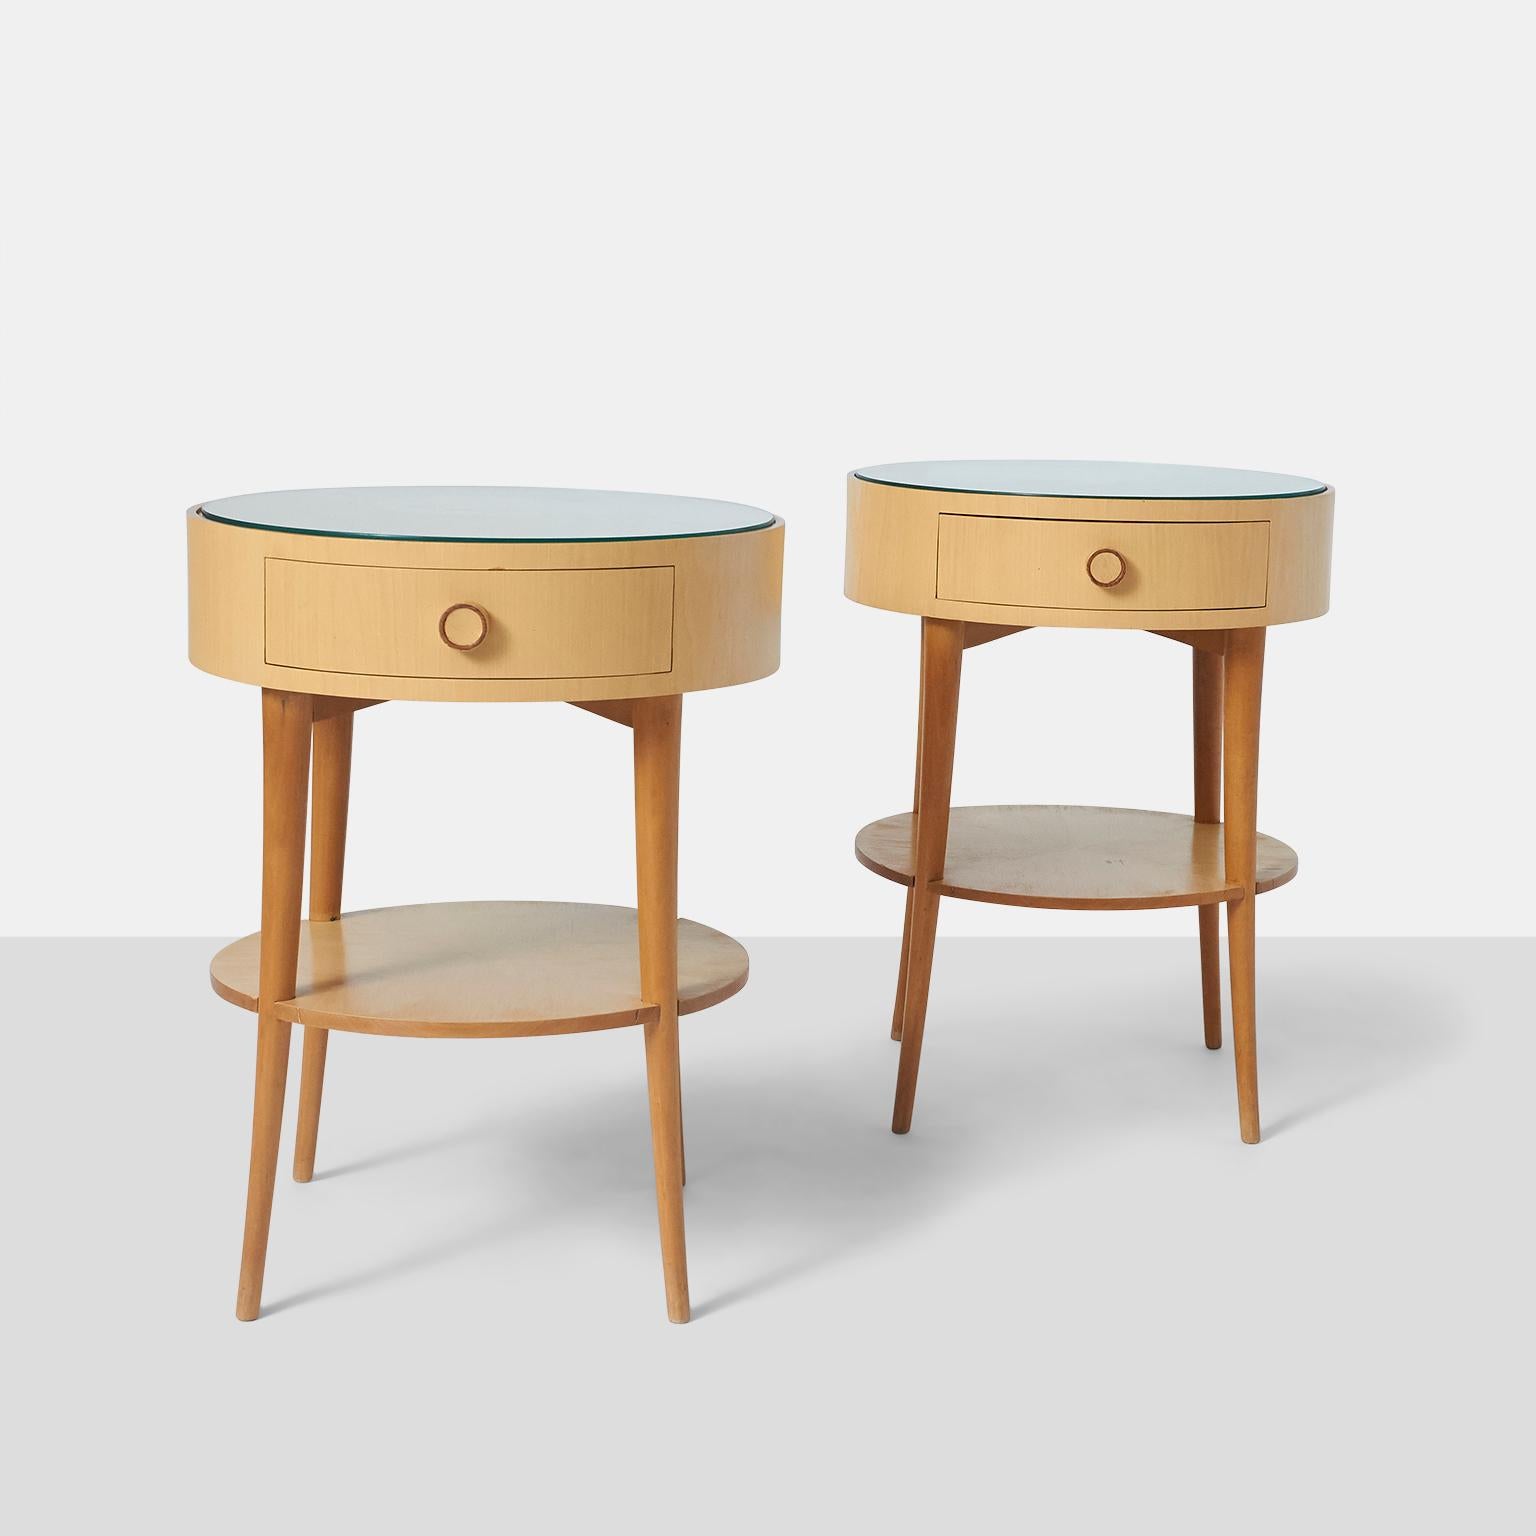 Pair of Joaquim Tenreiro side tables
A pair of Joaquim Tenriero side tables in ivory wood with glass top. There is a lower single shelf and a single drawer at the top. Exceptionally rare and retains the original label.
Brazil, circa 1950s.
 